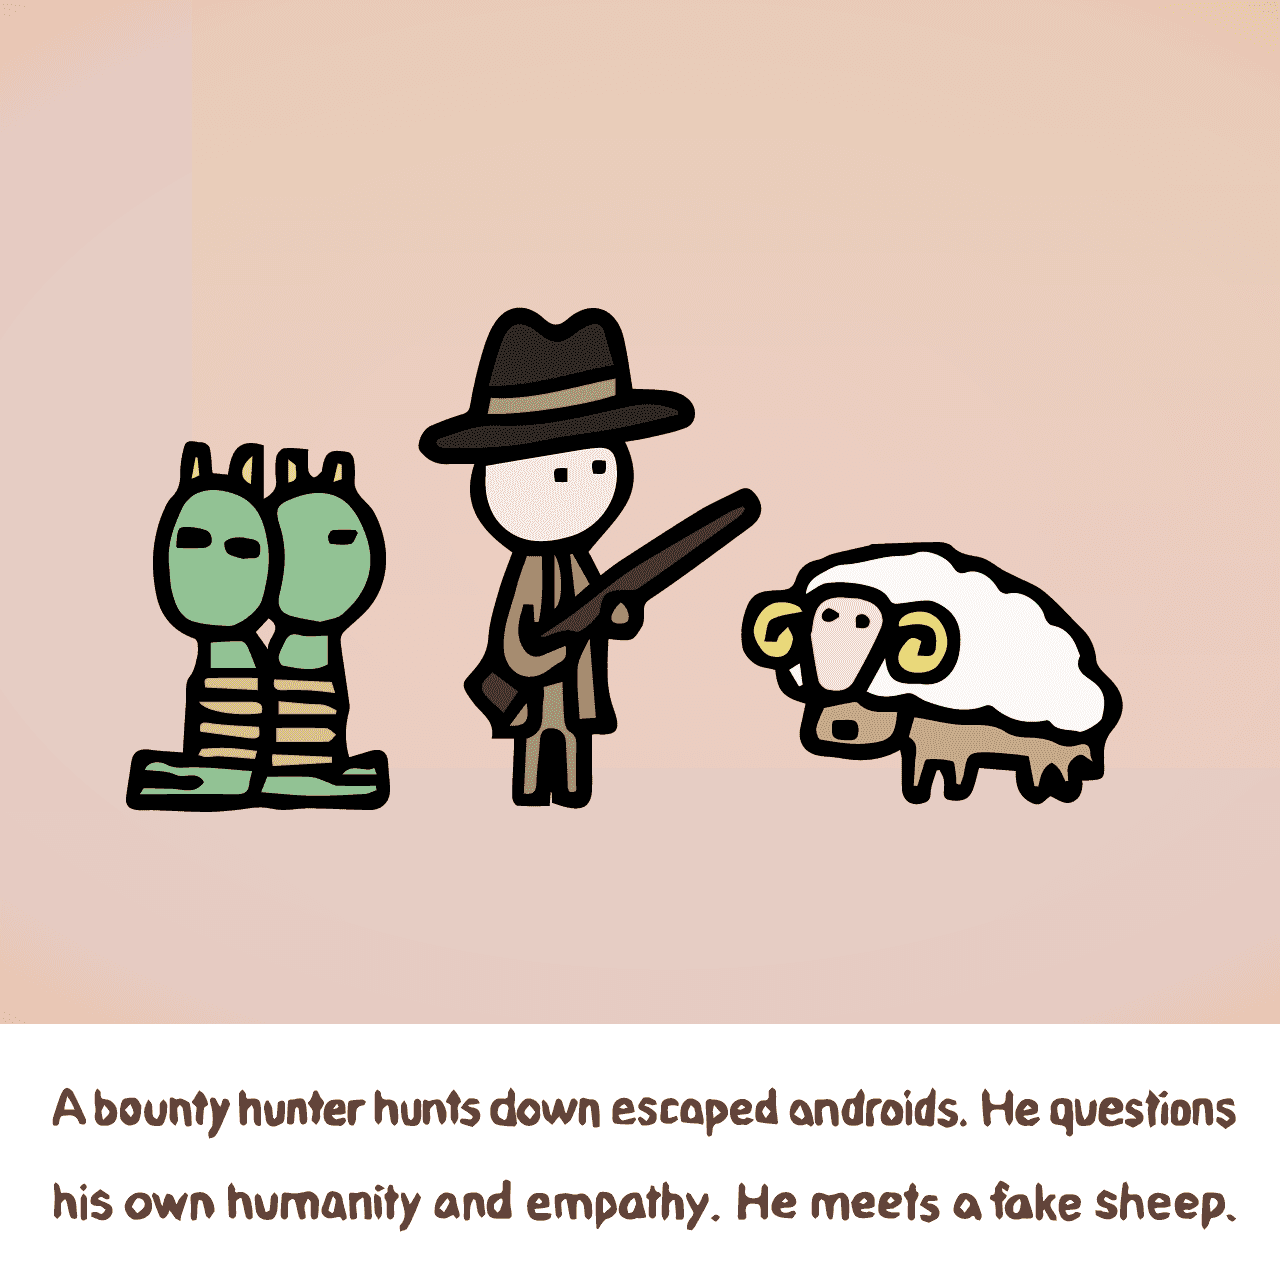 Philip K. Dick "Do Androids Dream of Electric Sheep? : A bounty hunter hunts down escaped androids. He questions his own humanity and empathy. He meets a fake sheep."